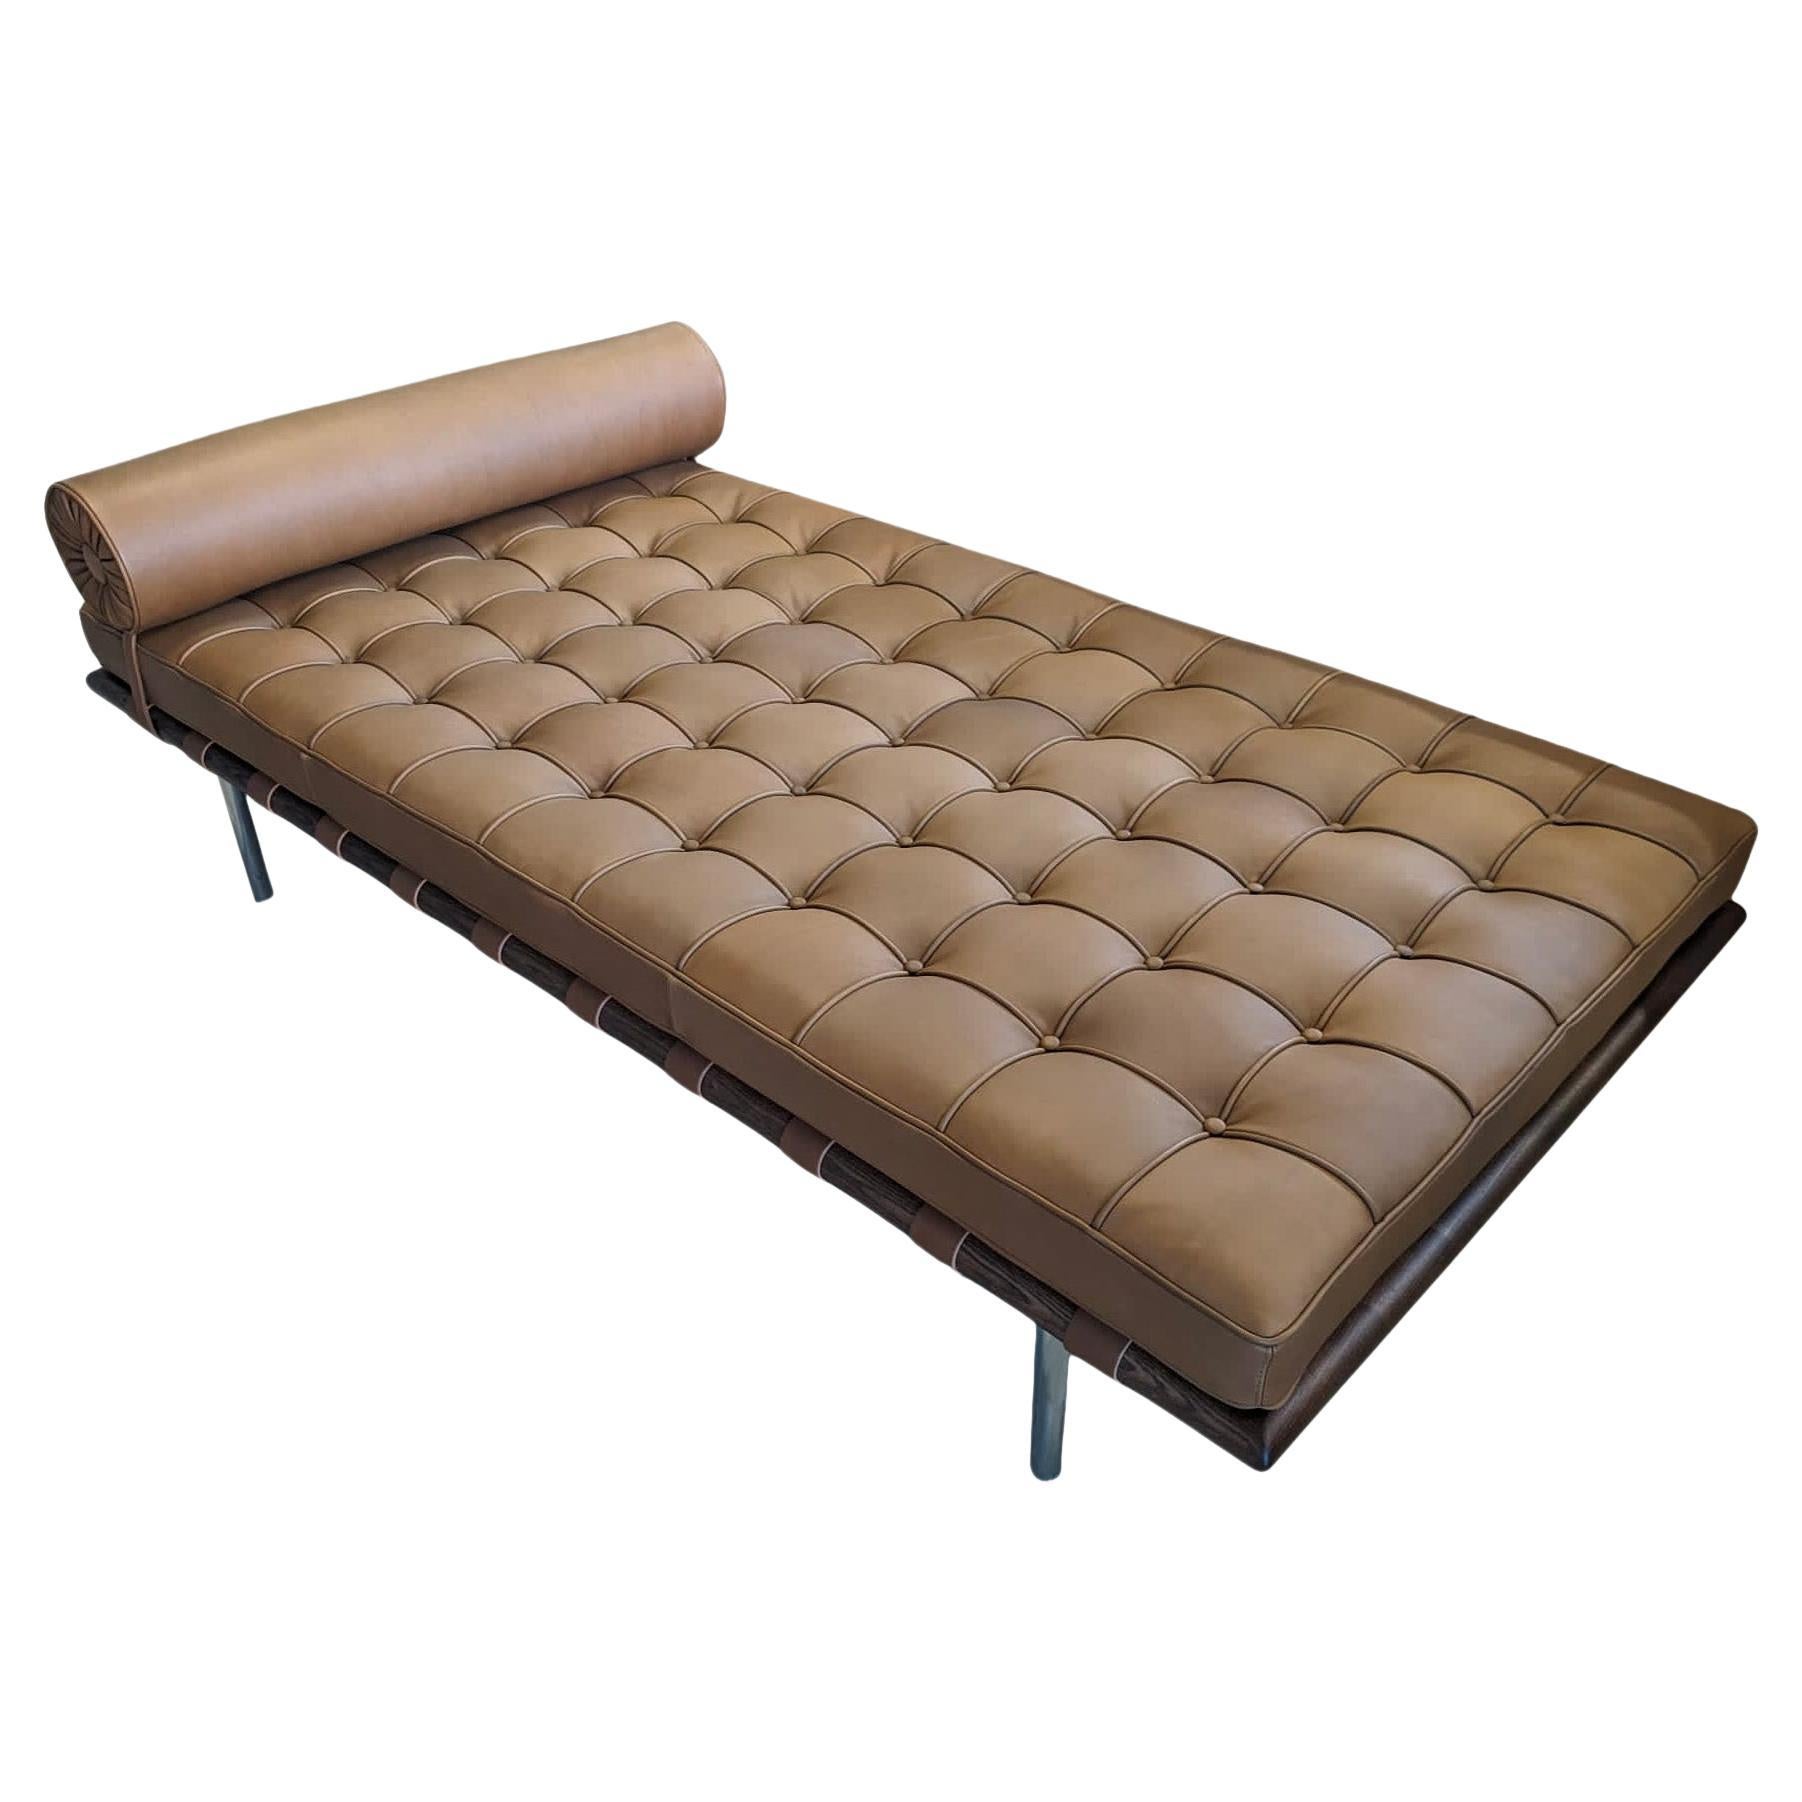 Ludwig Mies Van Der Rohe Bauhaus Coffee Leather Barcelona Daybed for Knoll, 1970